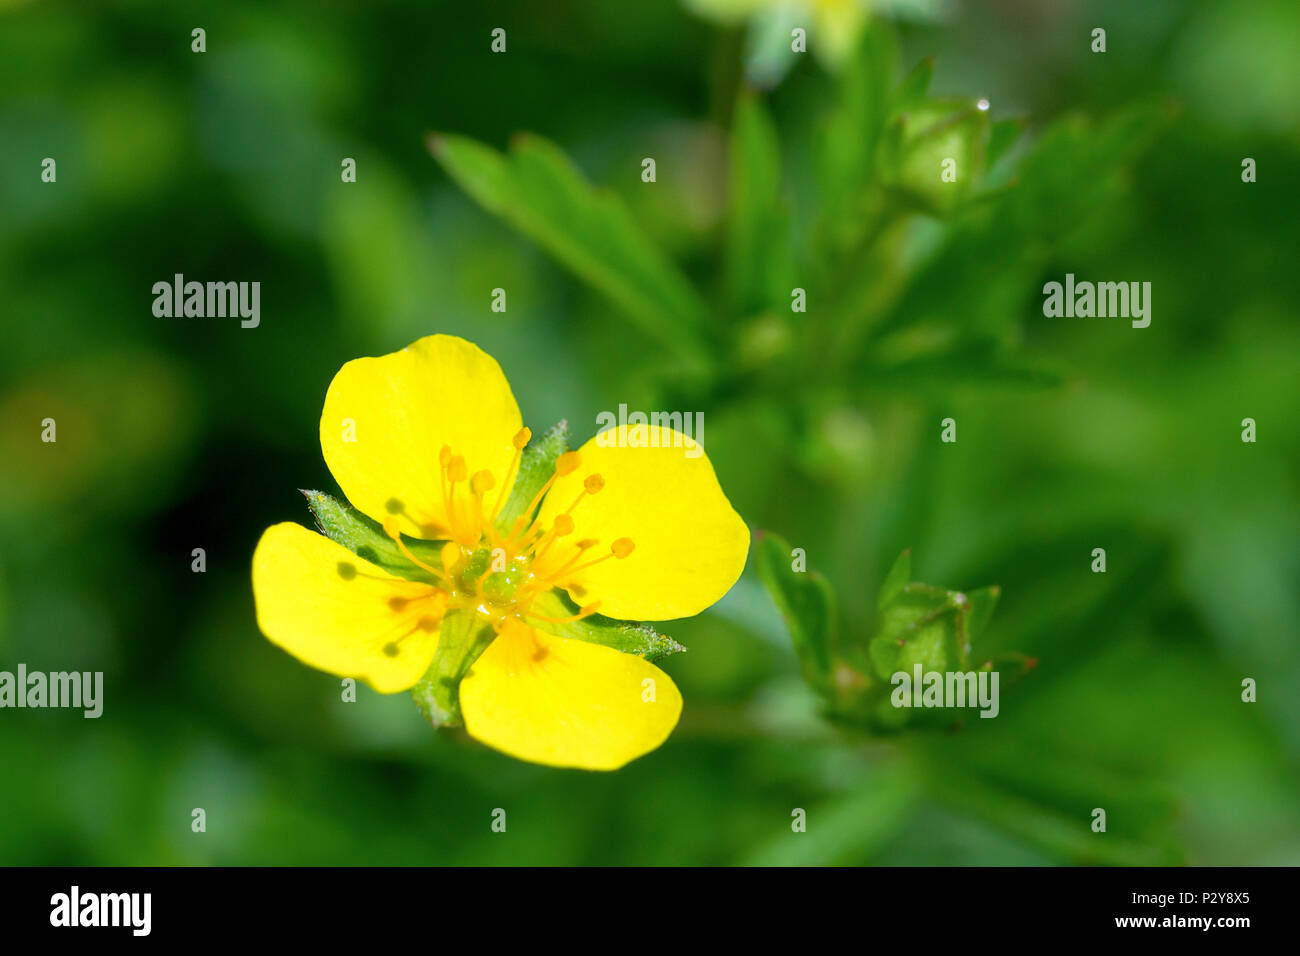 Tormentil (potentilla erecta), close up of a single flower with buds and leaves in background. Stock Photo